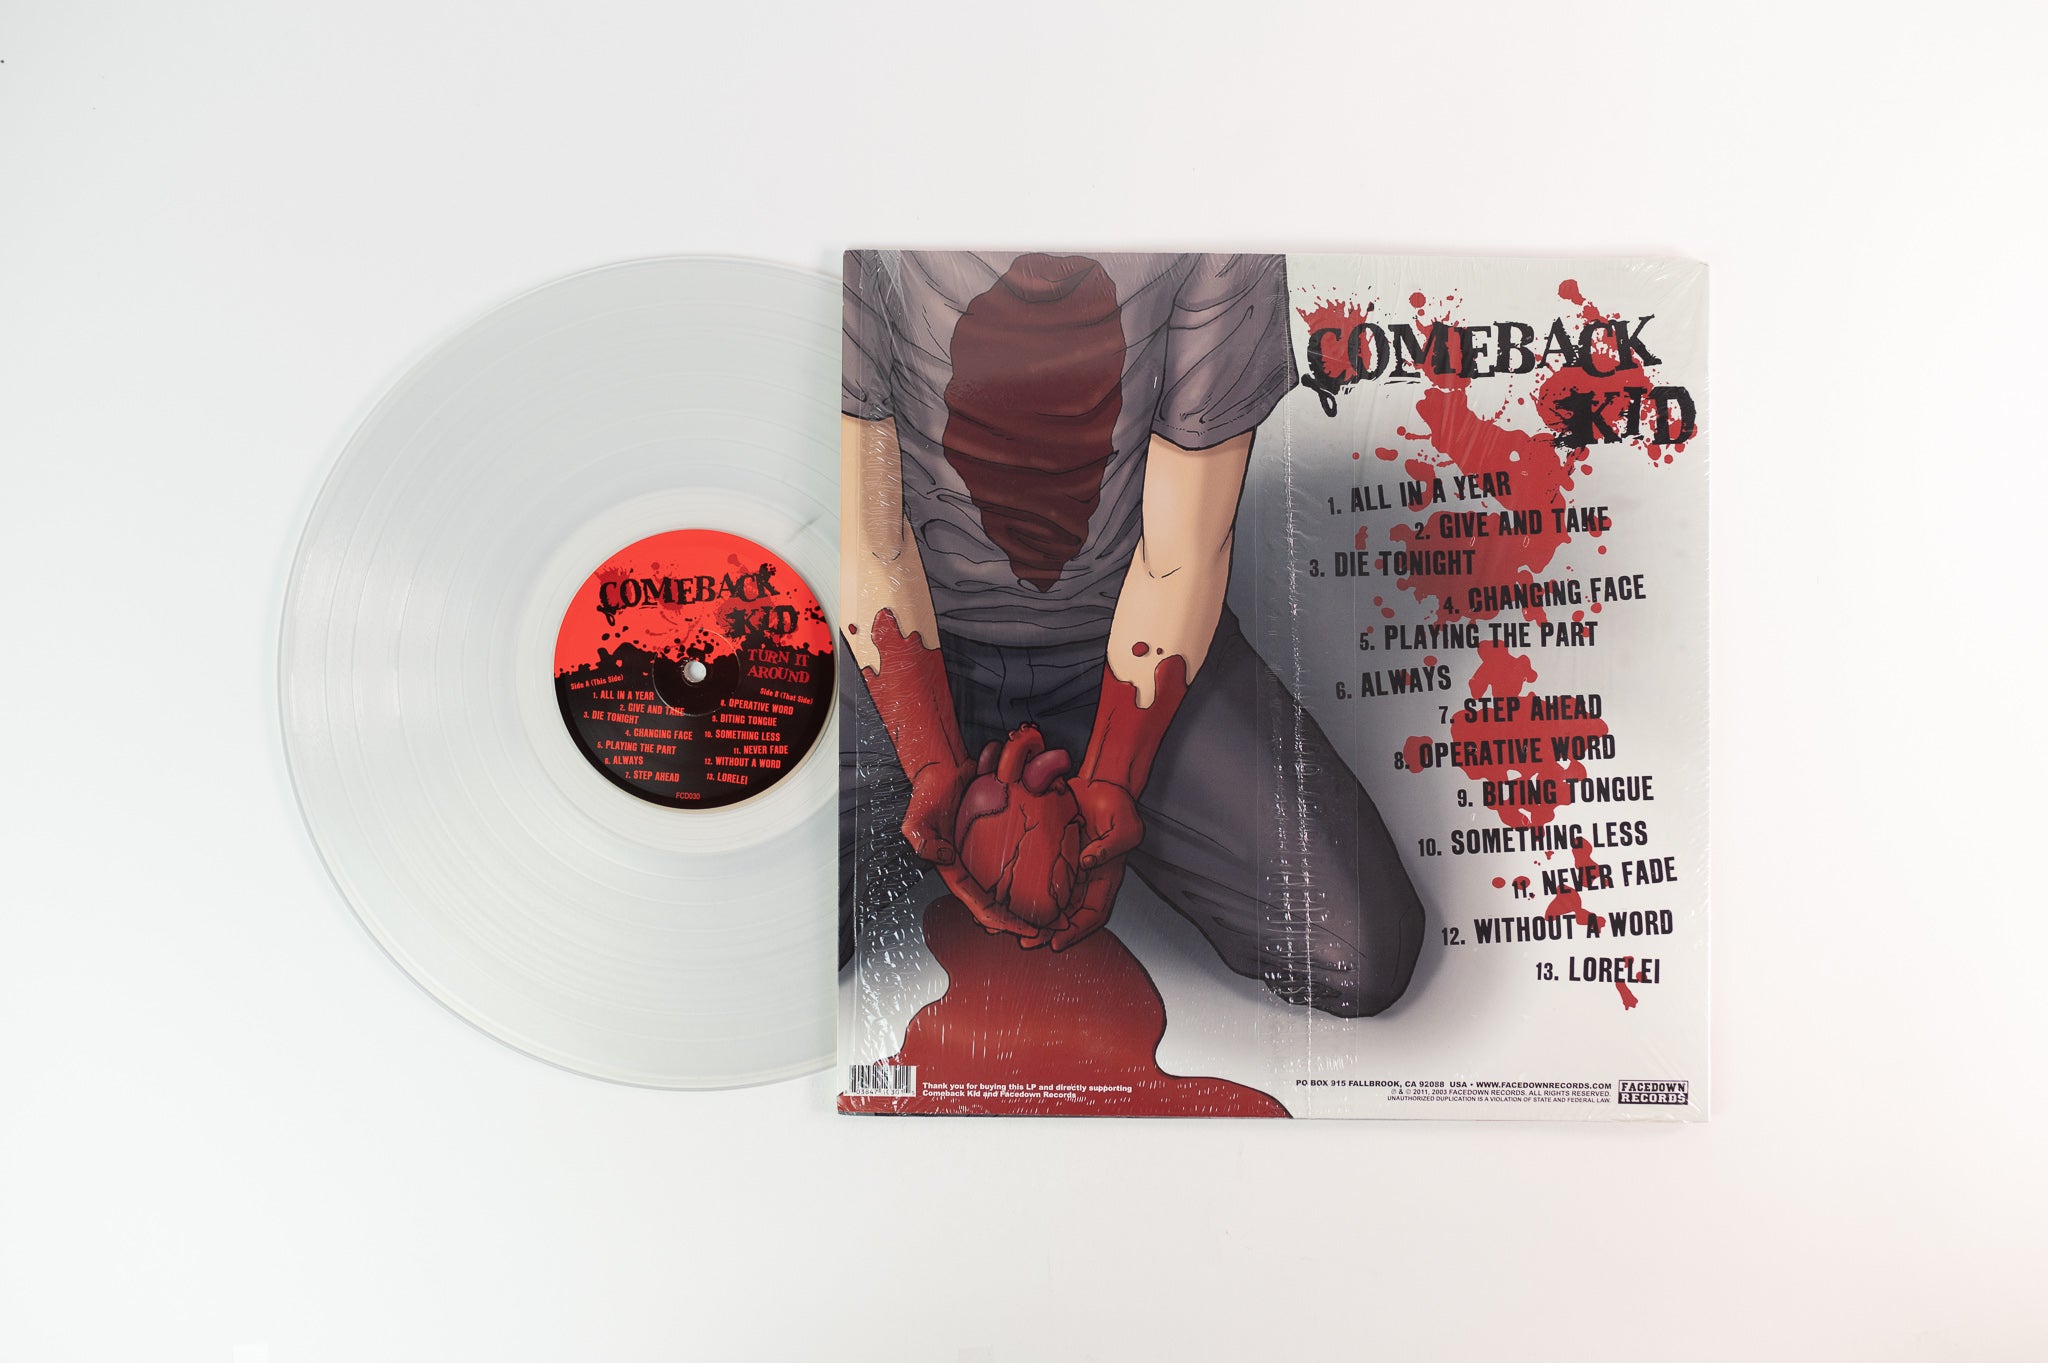 Comeback Kid - Turn It Around on Facedown Records - Clear Vinyl